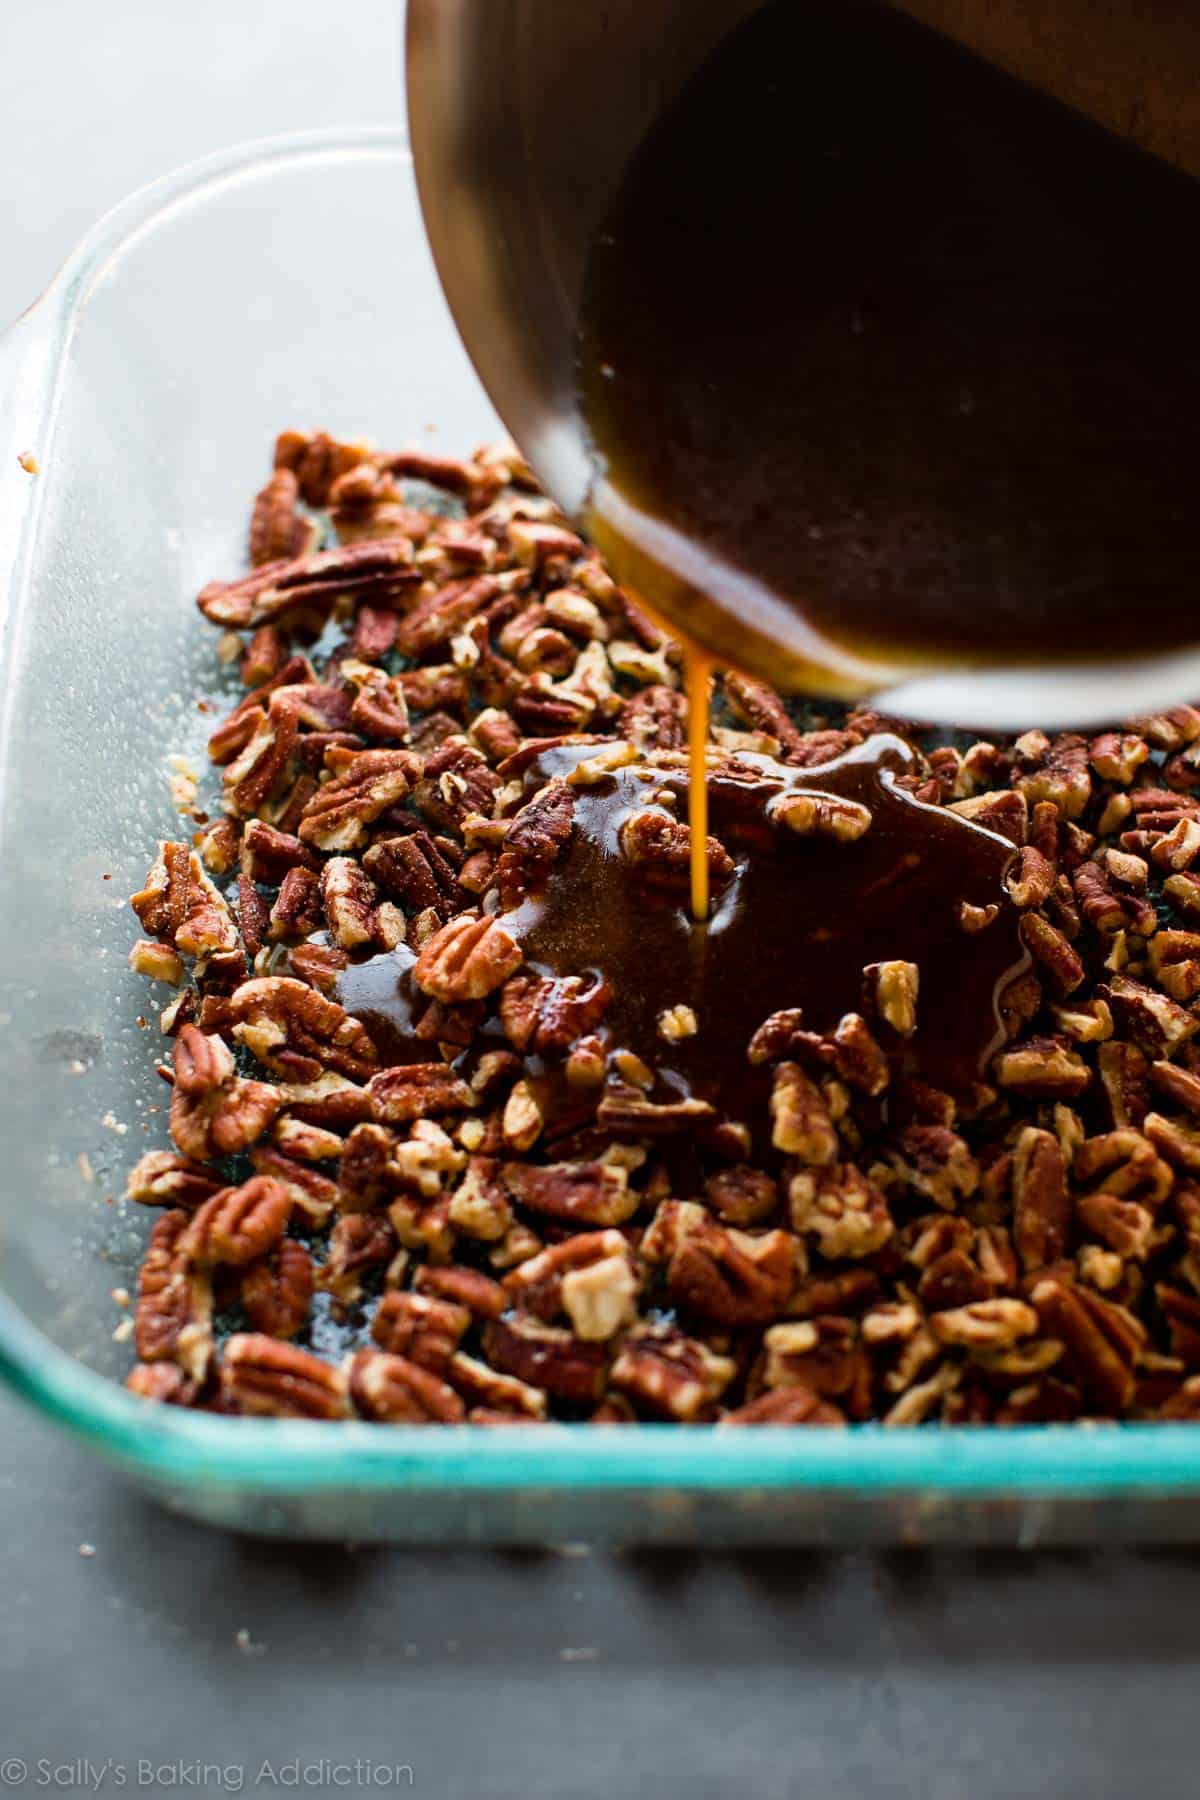 pouring liquid topping ingredients onto layer of pecans in a glass baking dish